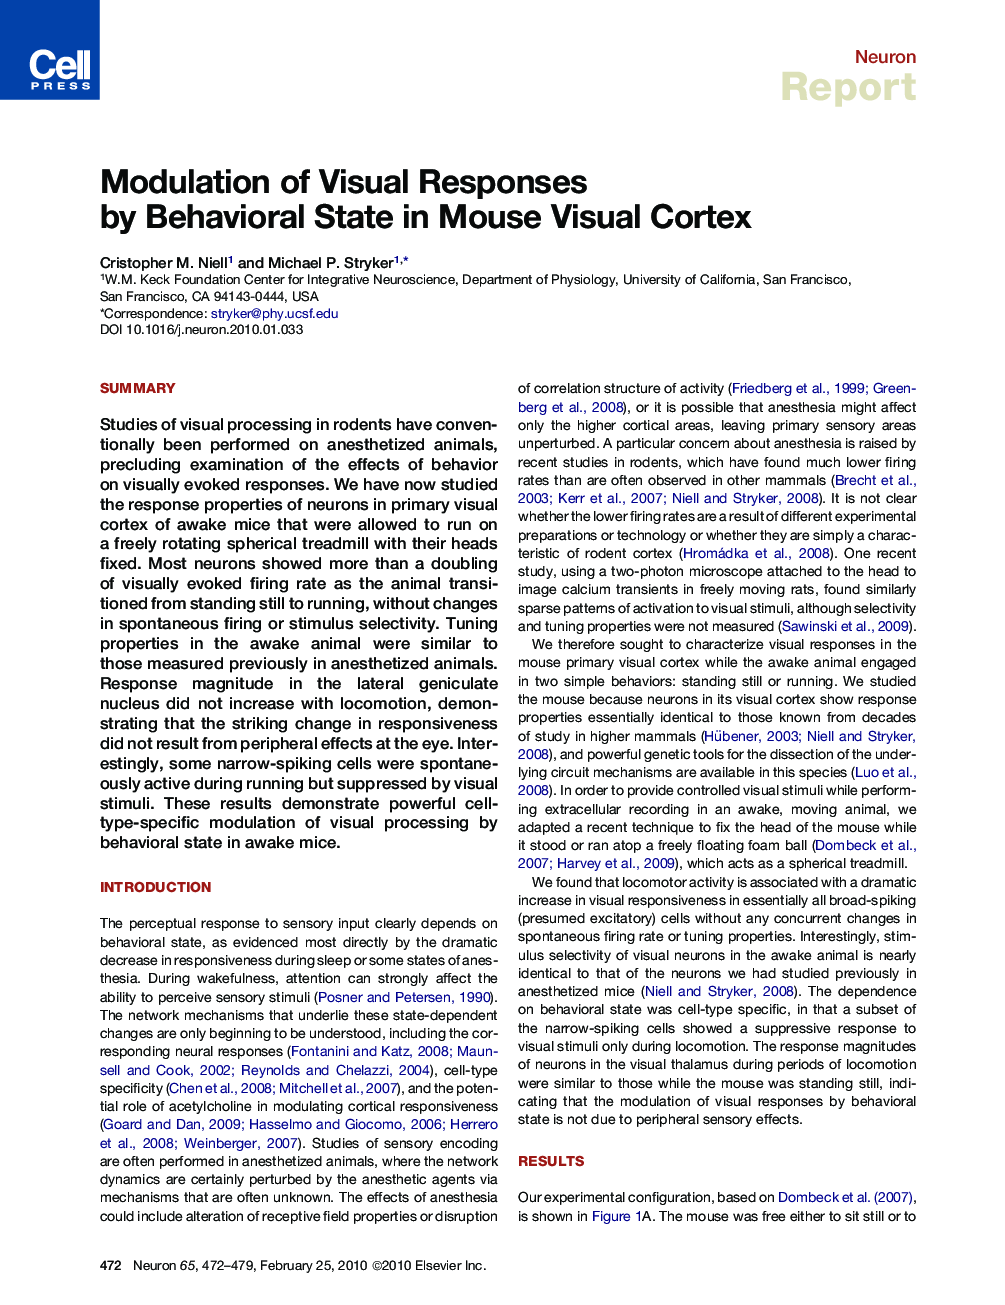 Modulation of Visual Responses by Behavioral State in Mouse Visual Cortex